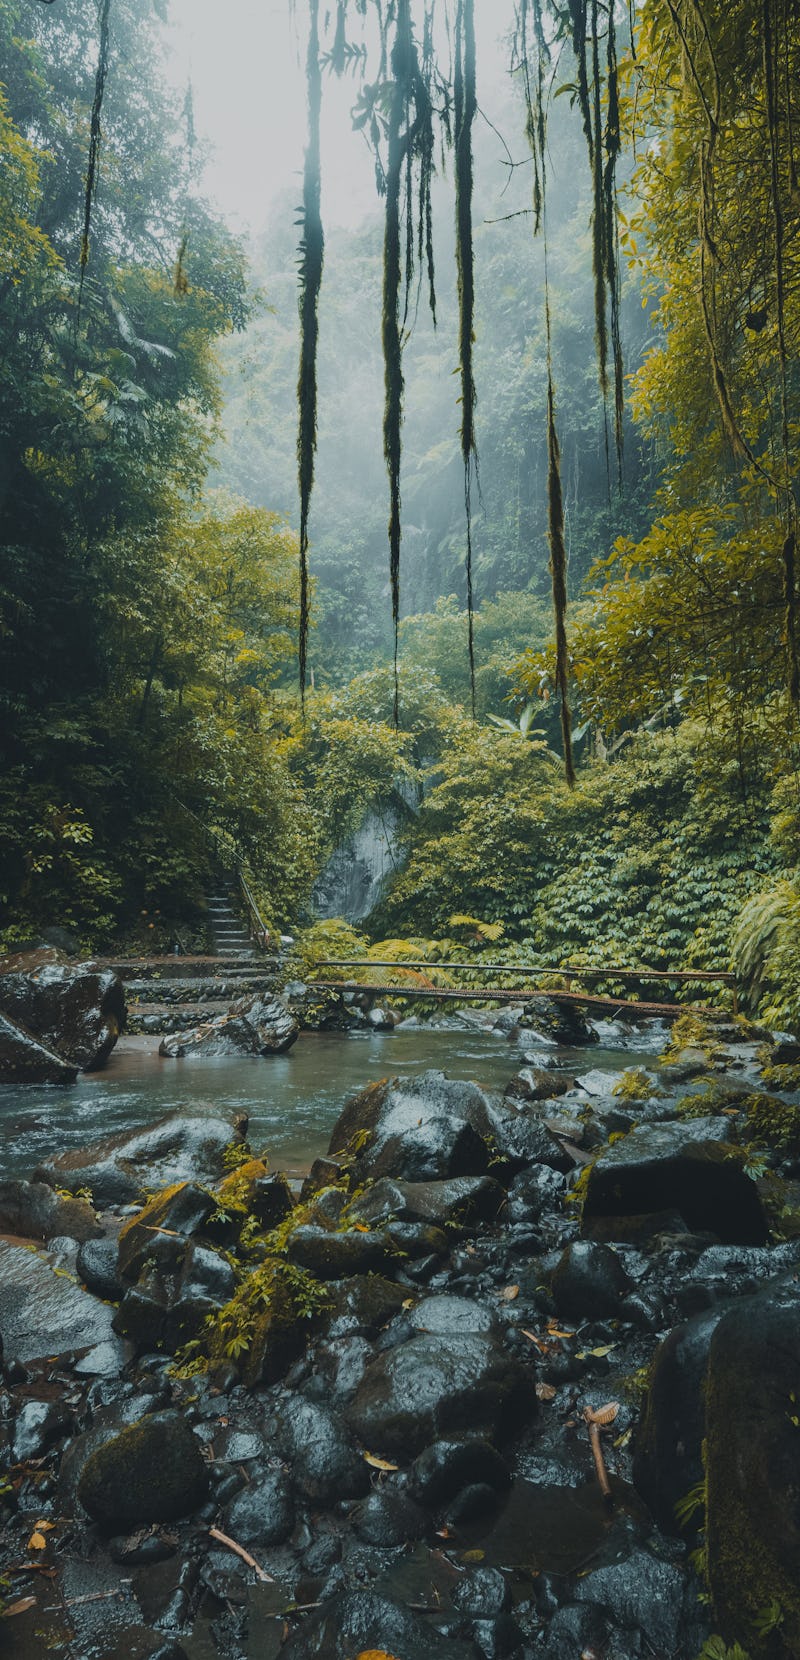 A river stream deep down in the green tropical rainforest of Bali, Indonesia.